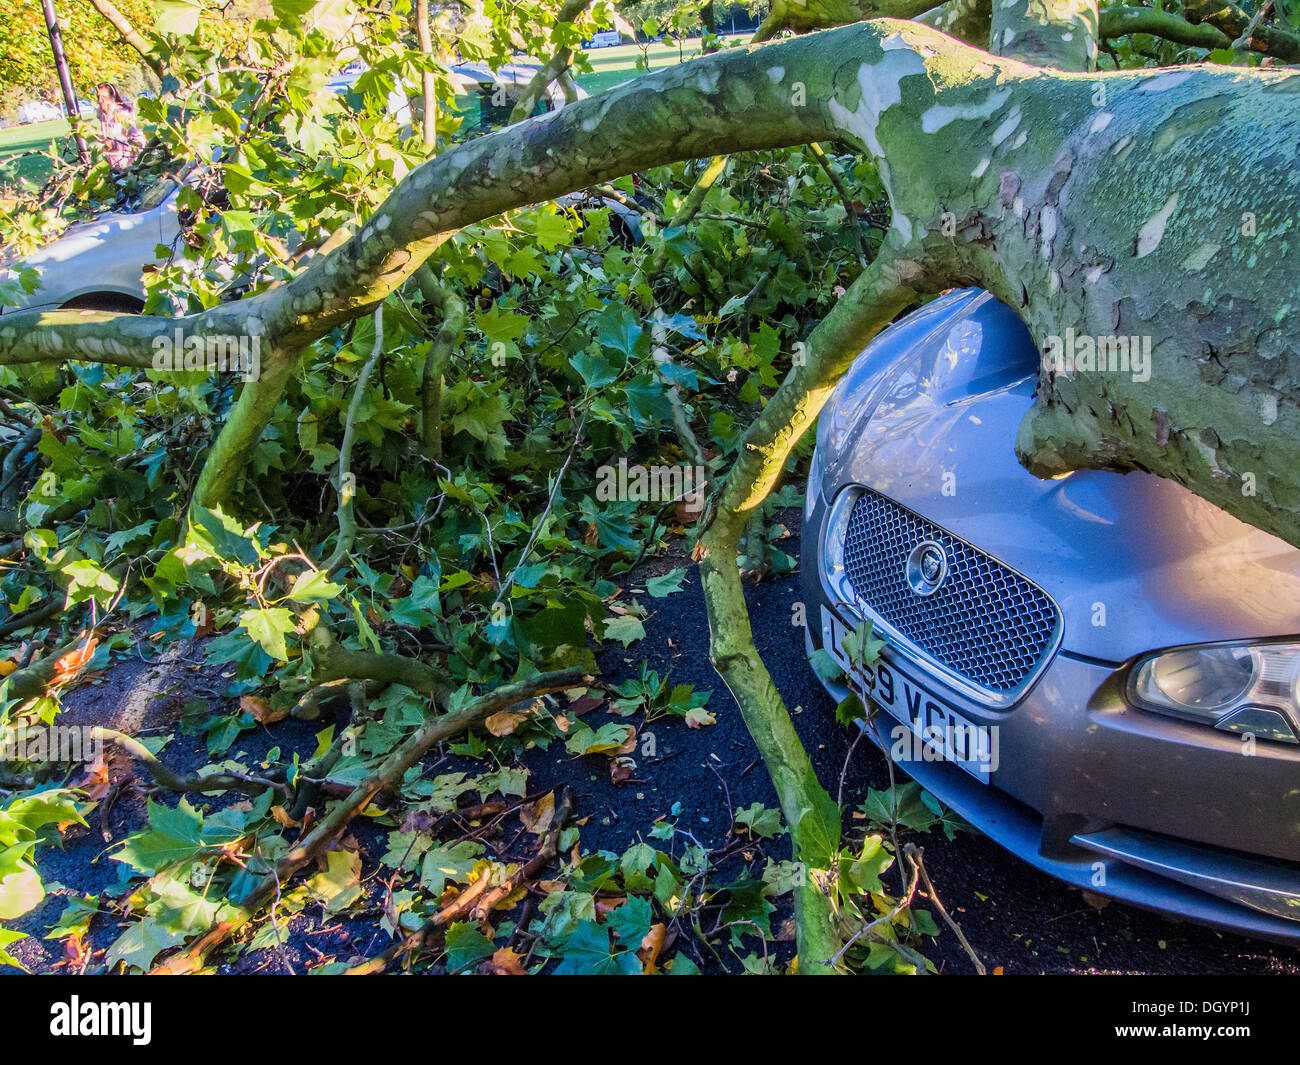 Nightingale Lane, Clapham, London, UK  . 28th Oct, 2013. Part of a tree falls on a Jaguar saloon car as a result of the storm. The interior of the car appears undamaged so it is presumed the occupants abandoned their car as it is not in a parking space but in the middle of its lane. Another car in a parking space across the road is also damaged. Commuters and school children, on their way to a delayed Northern Line at Clapham South, stop to look and take pictures.The storm, called St Jude, brought the windiest weather to hit the UK since 1987. Credit:  Guy Bell/Alamy Live News Stock Photo